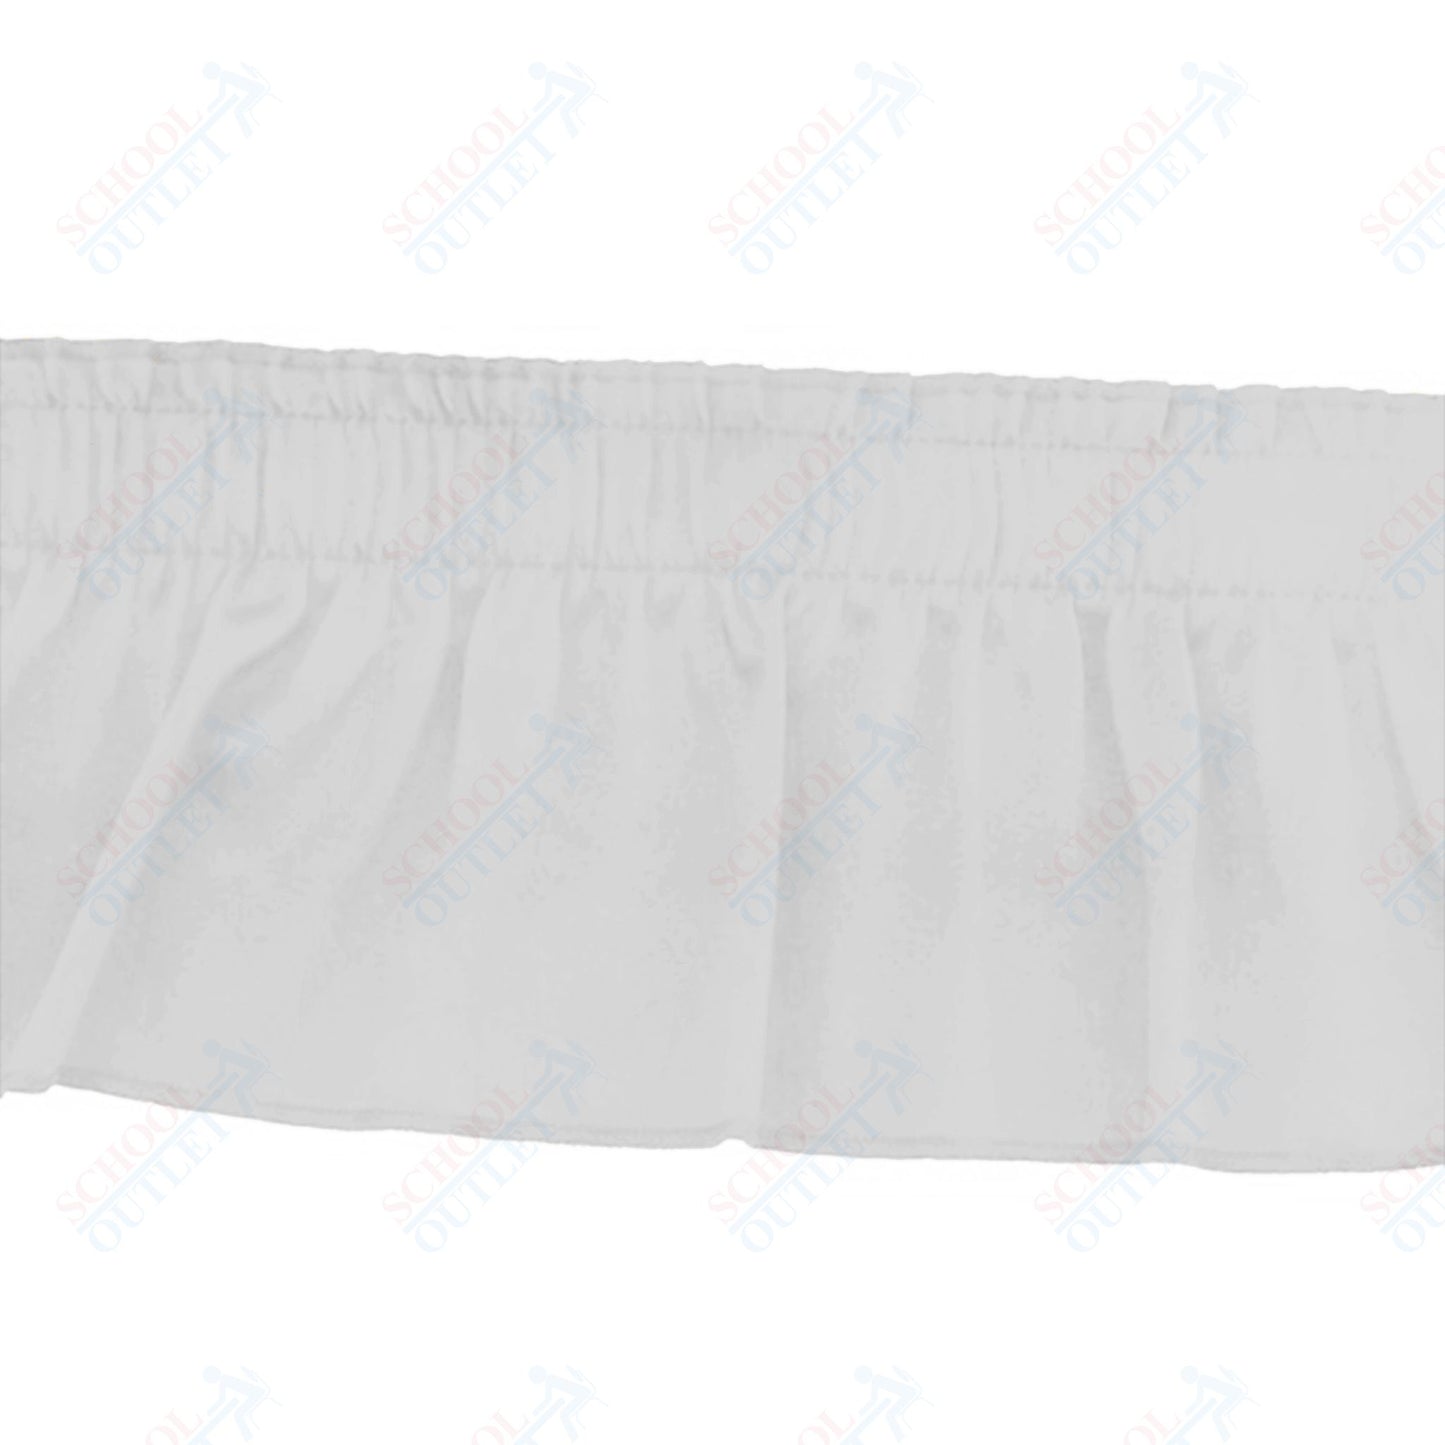 AmTab Stage and Riser Skirting - Shirred Pleat - 31" Skirting Height - Applicable for 32" Stage Height   (AmTab AMT-SKRT32)